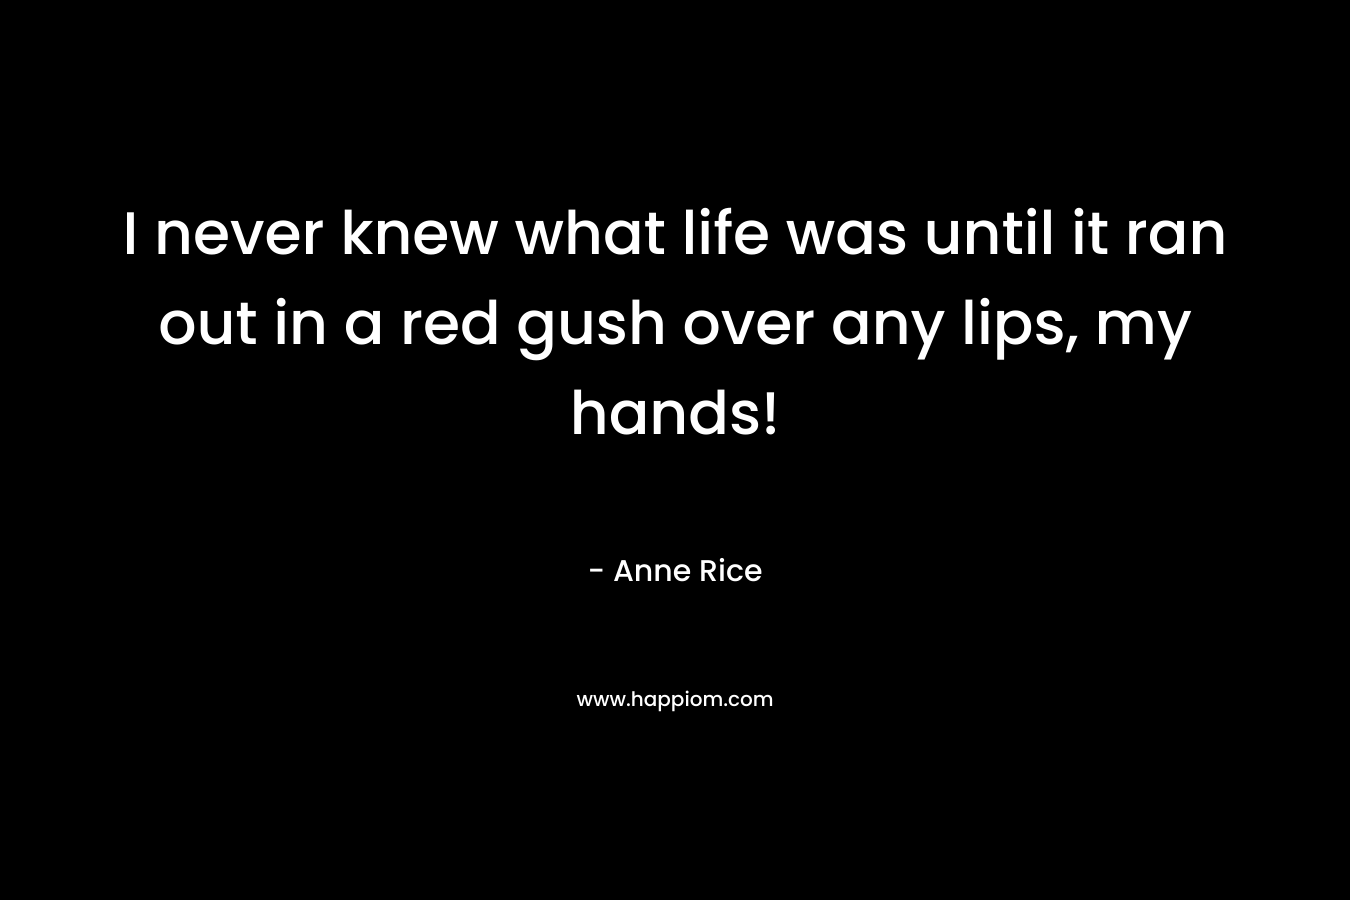 I never knew what life was until it ran out in a red gush over any lips, my hands! – Anne Rice